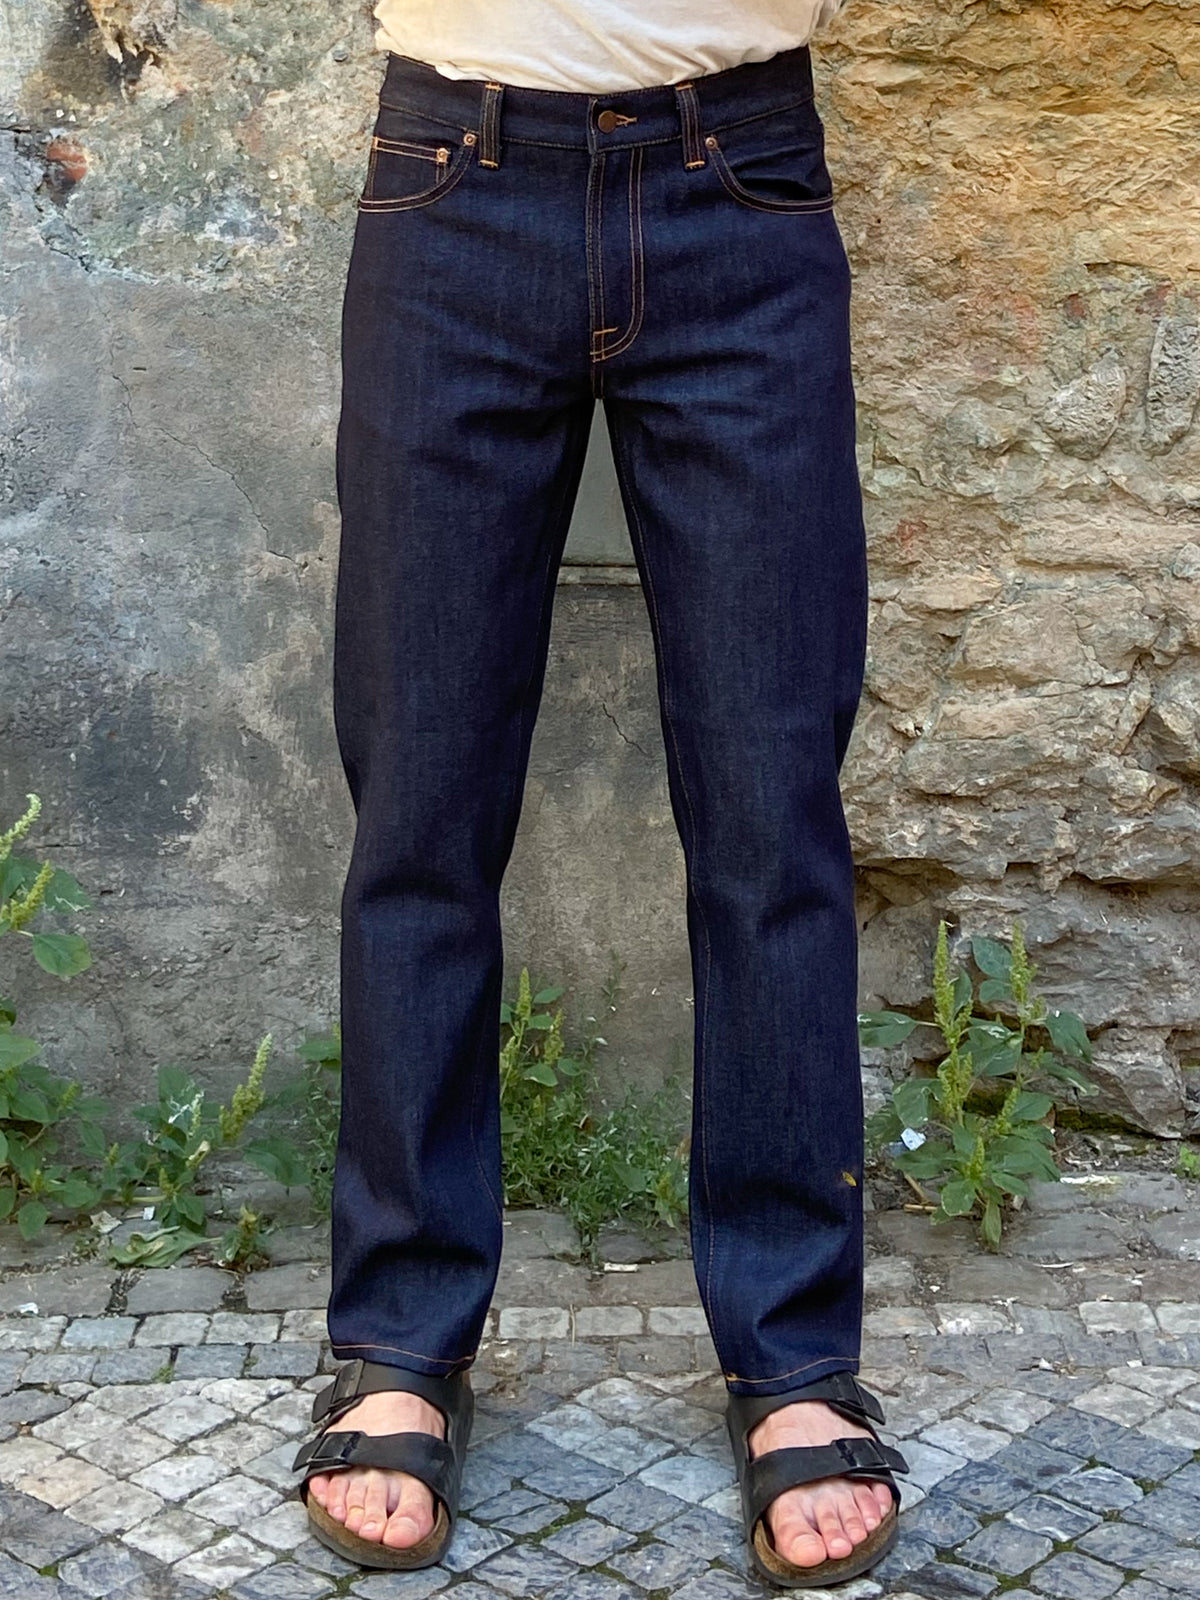 Nudie Jeans Gritty Jackson Dry Classic Navy